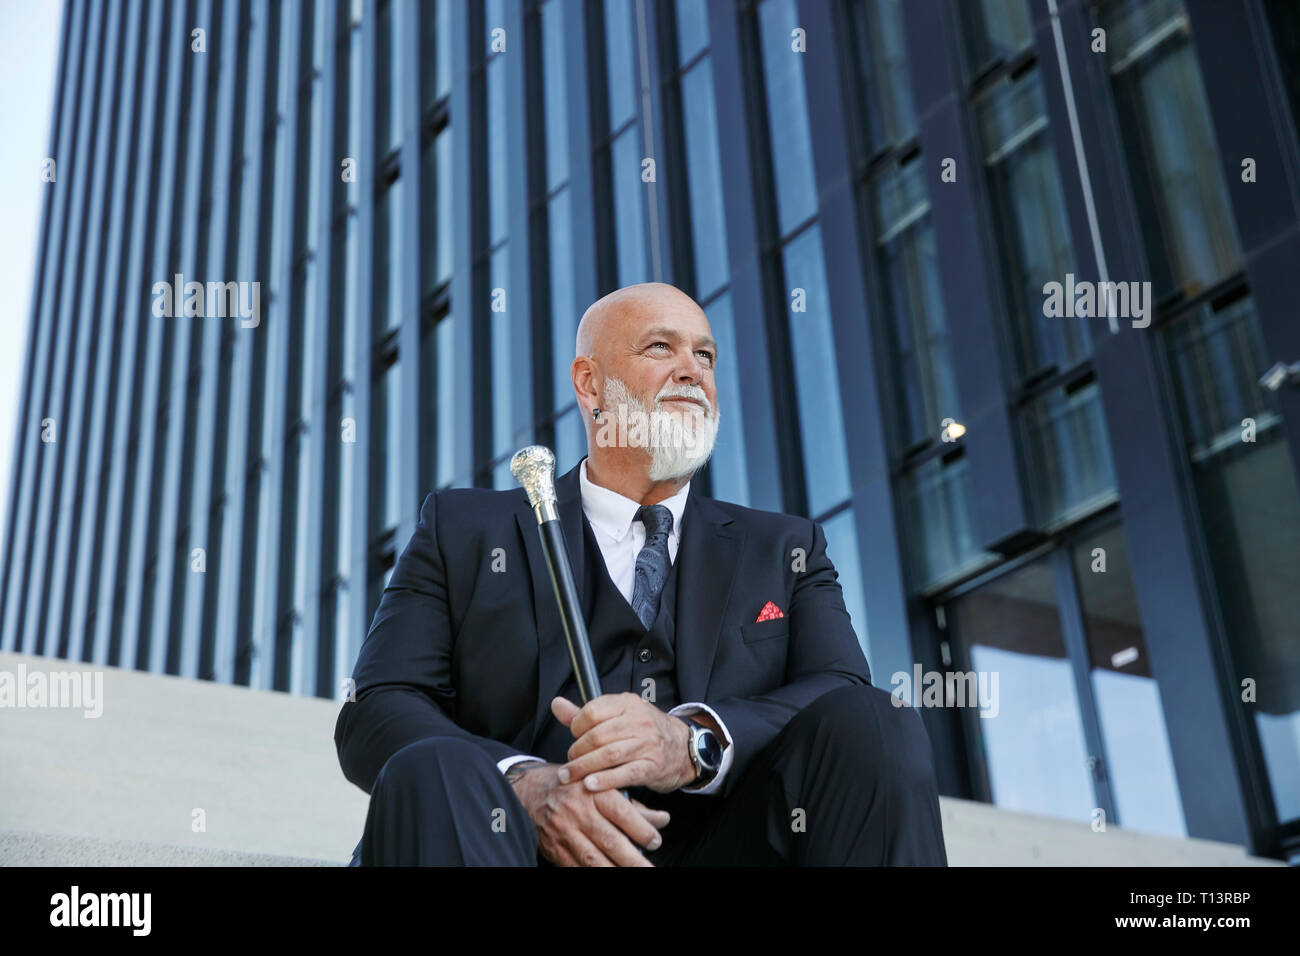 Elegant businessman with walking cane, sitting on stairs in the city Stock Photo